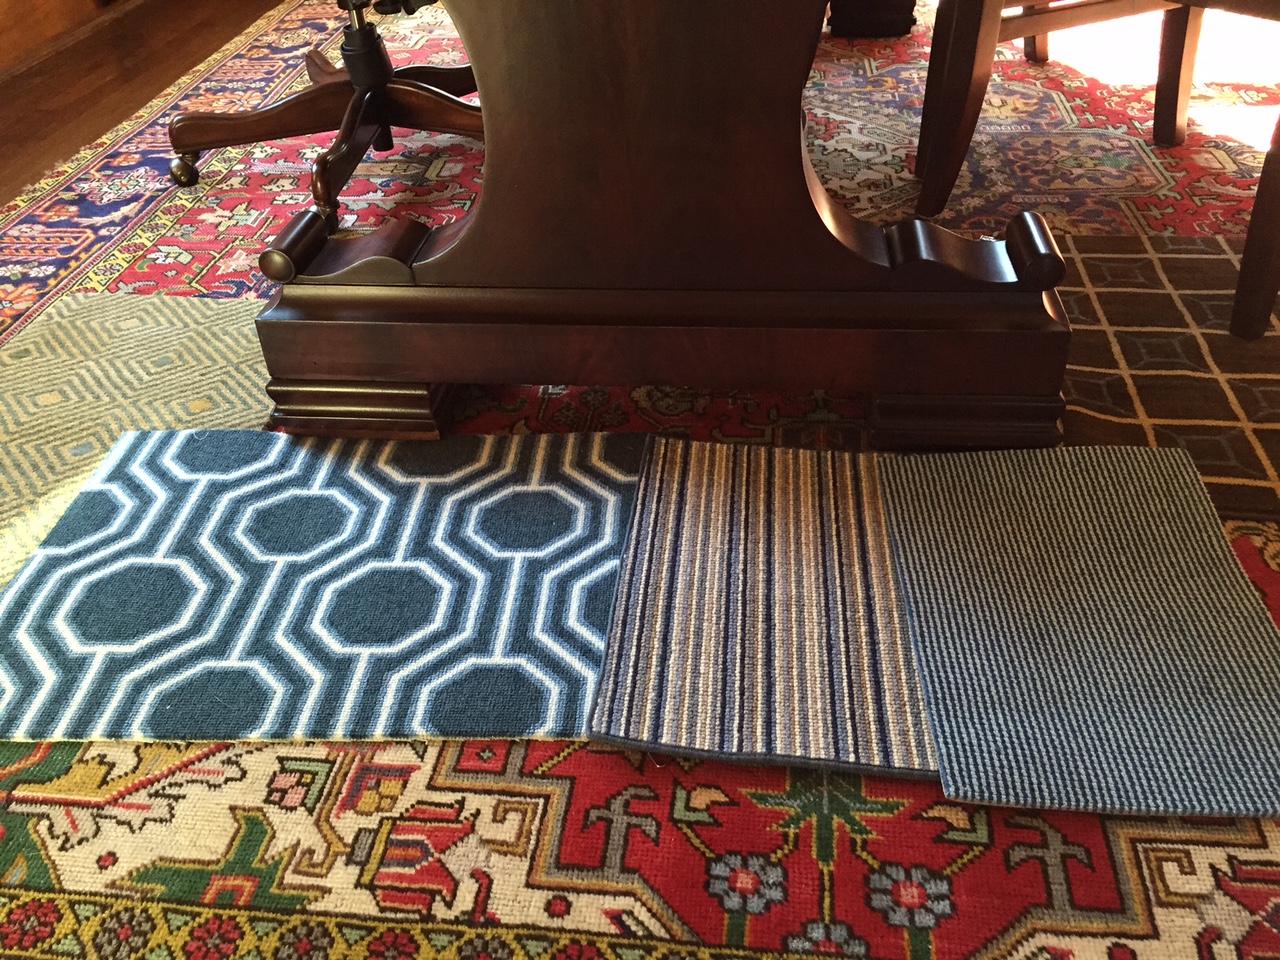 One Room Challenge Fall 2015, Week 2 - Carpet Samples | Kelly Rogers Interiors | Interiors for Families